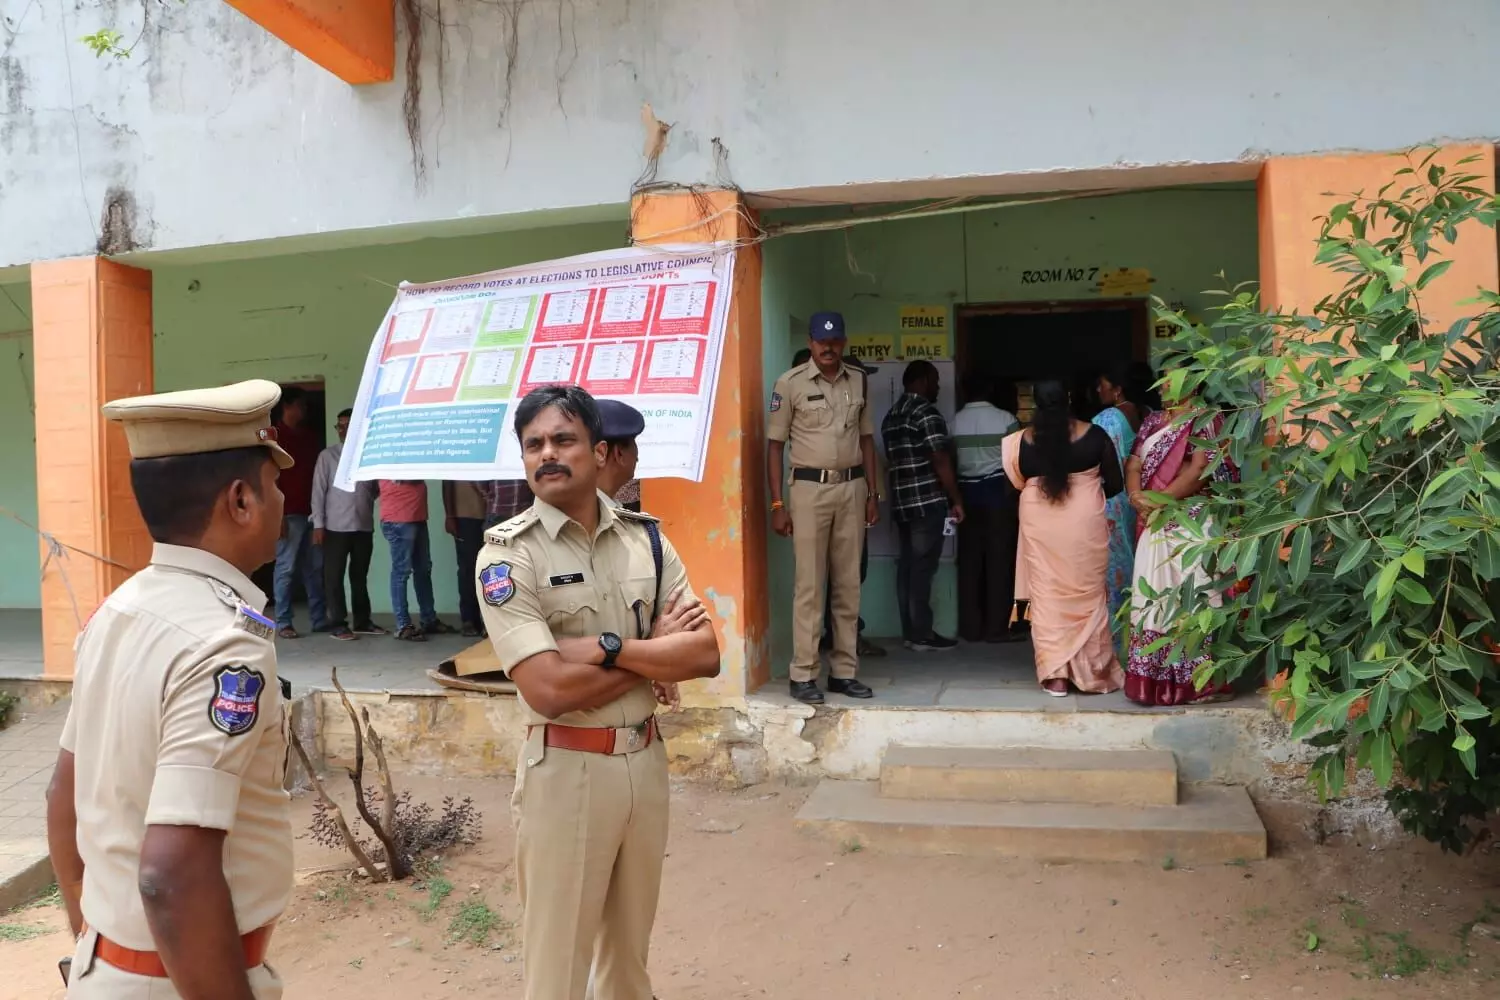 Legislative council by-elections in Bhadradri district ended peacefully with a voter turnout of 70.01% across the district